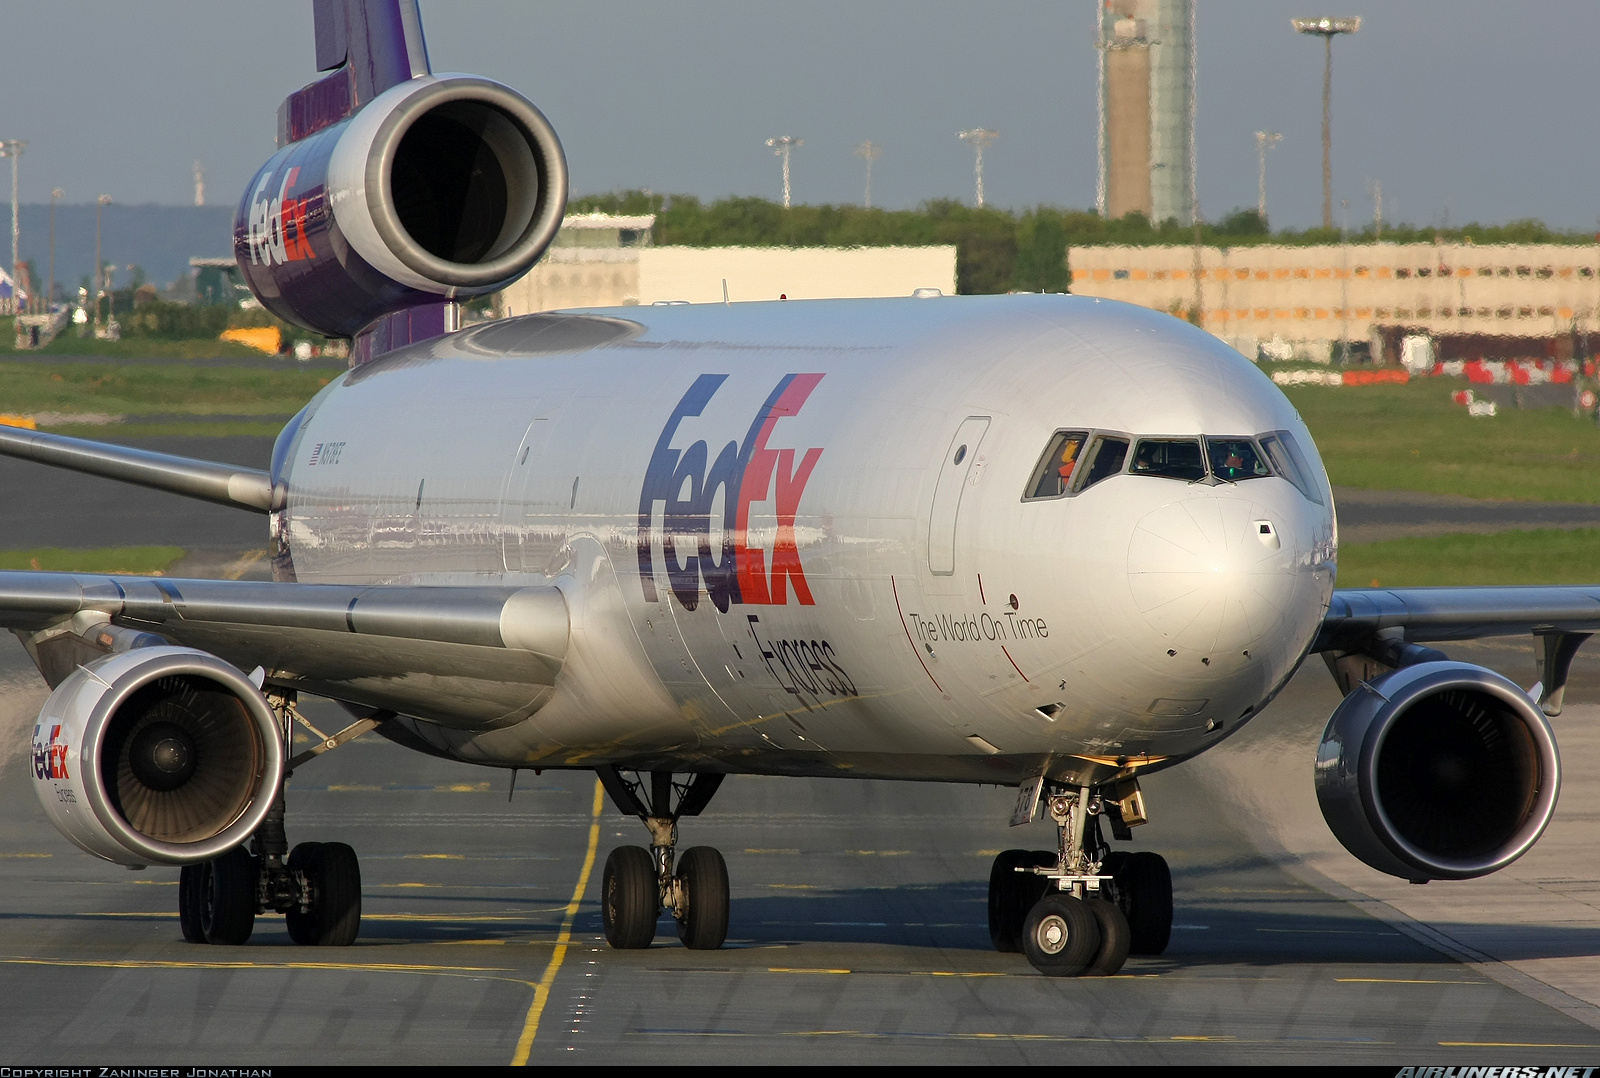 828 Of 1,223 - Fedex Express Md 11 , HD Wallpaper & Backgrounds